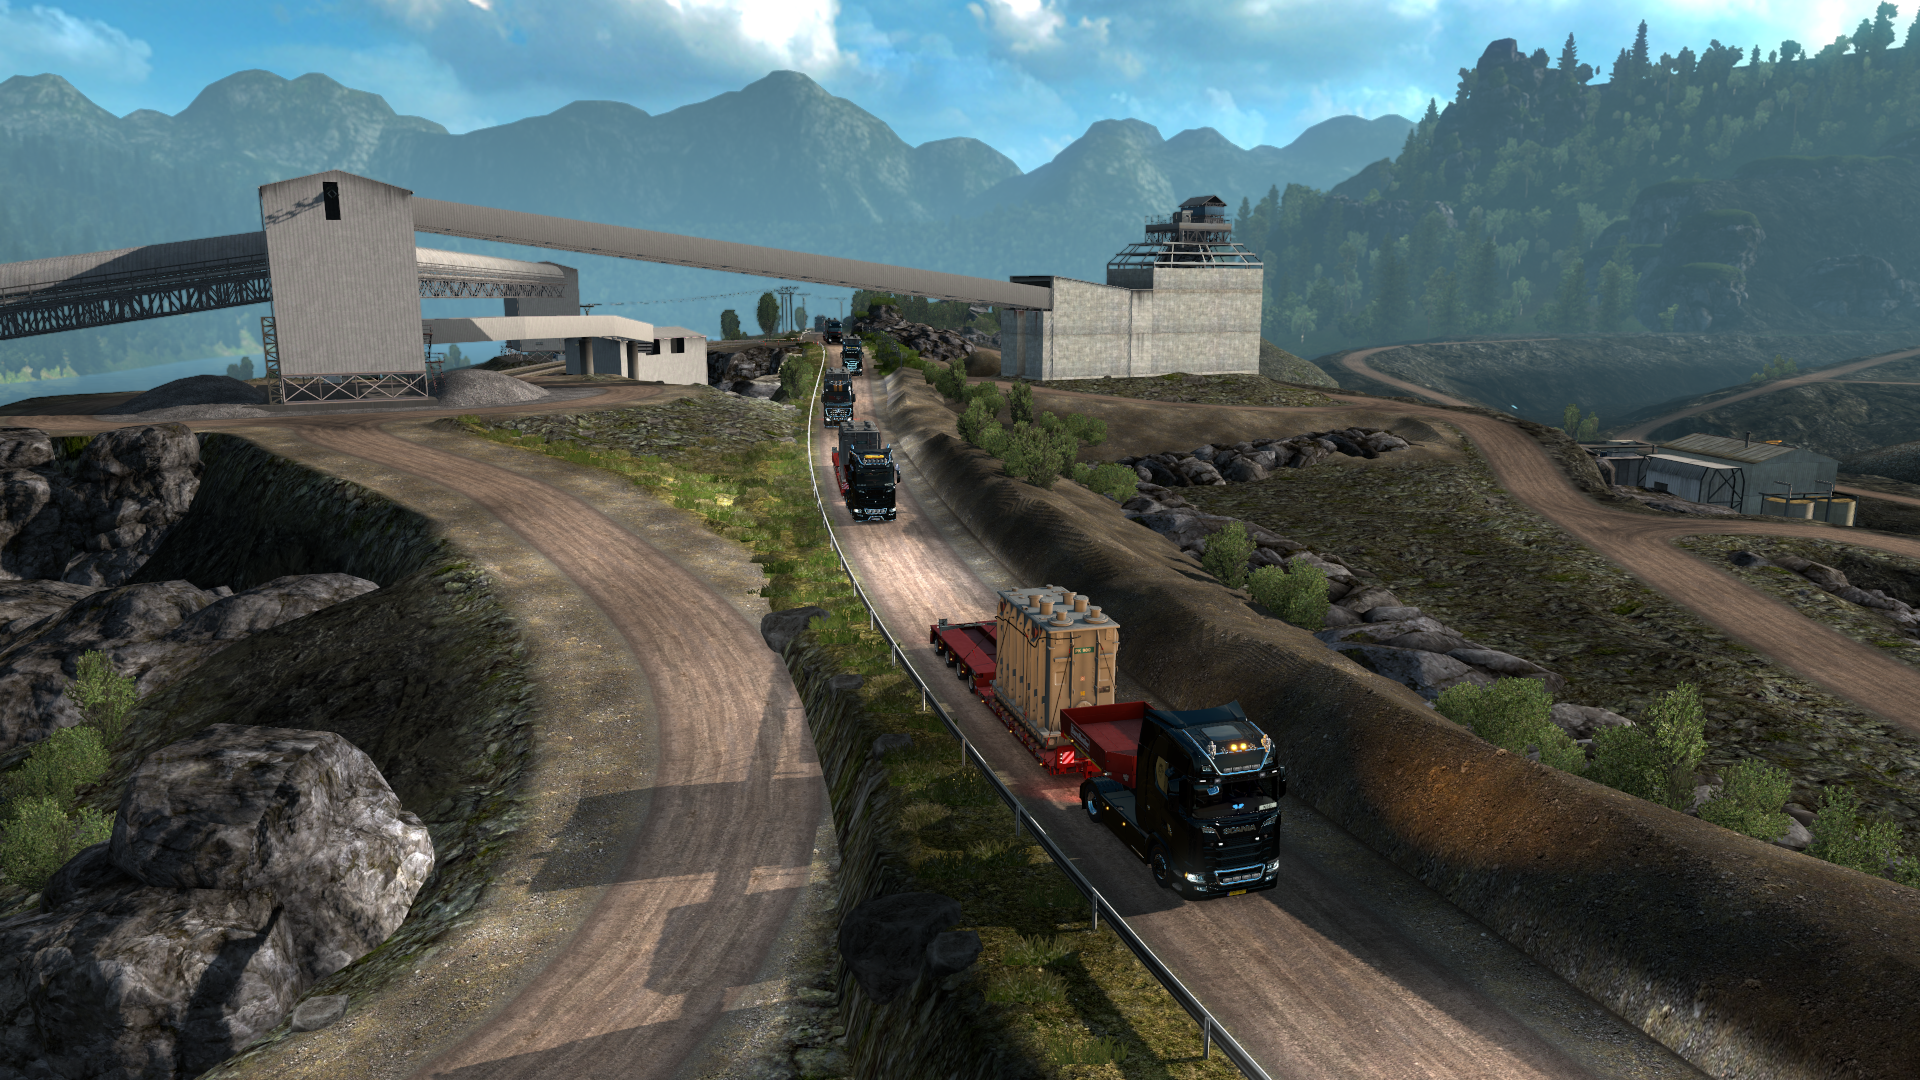 ets2_20200324_231611_00.png